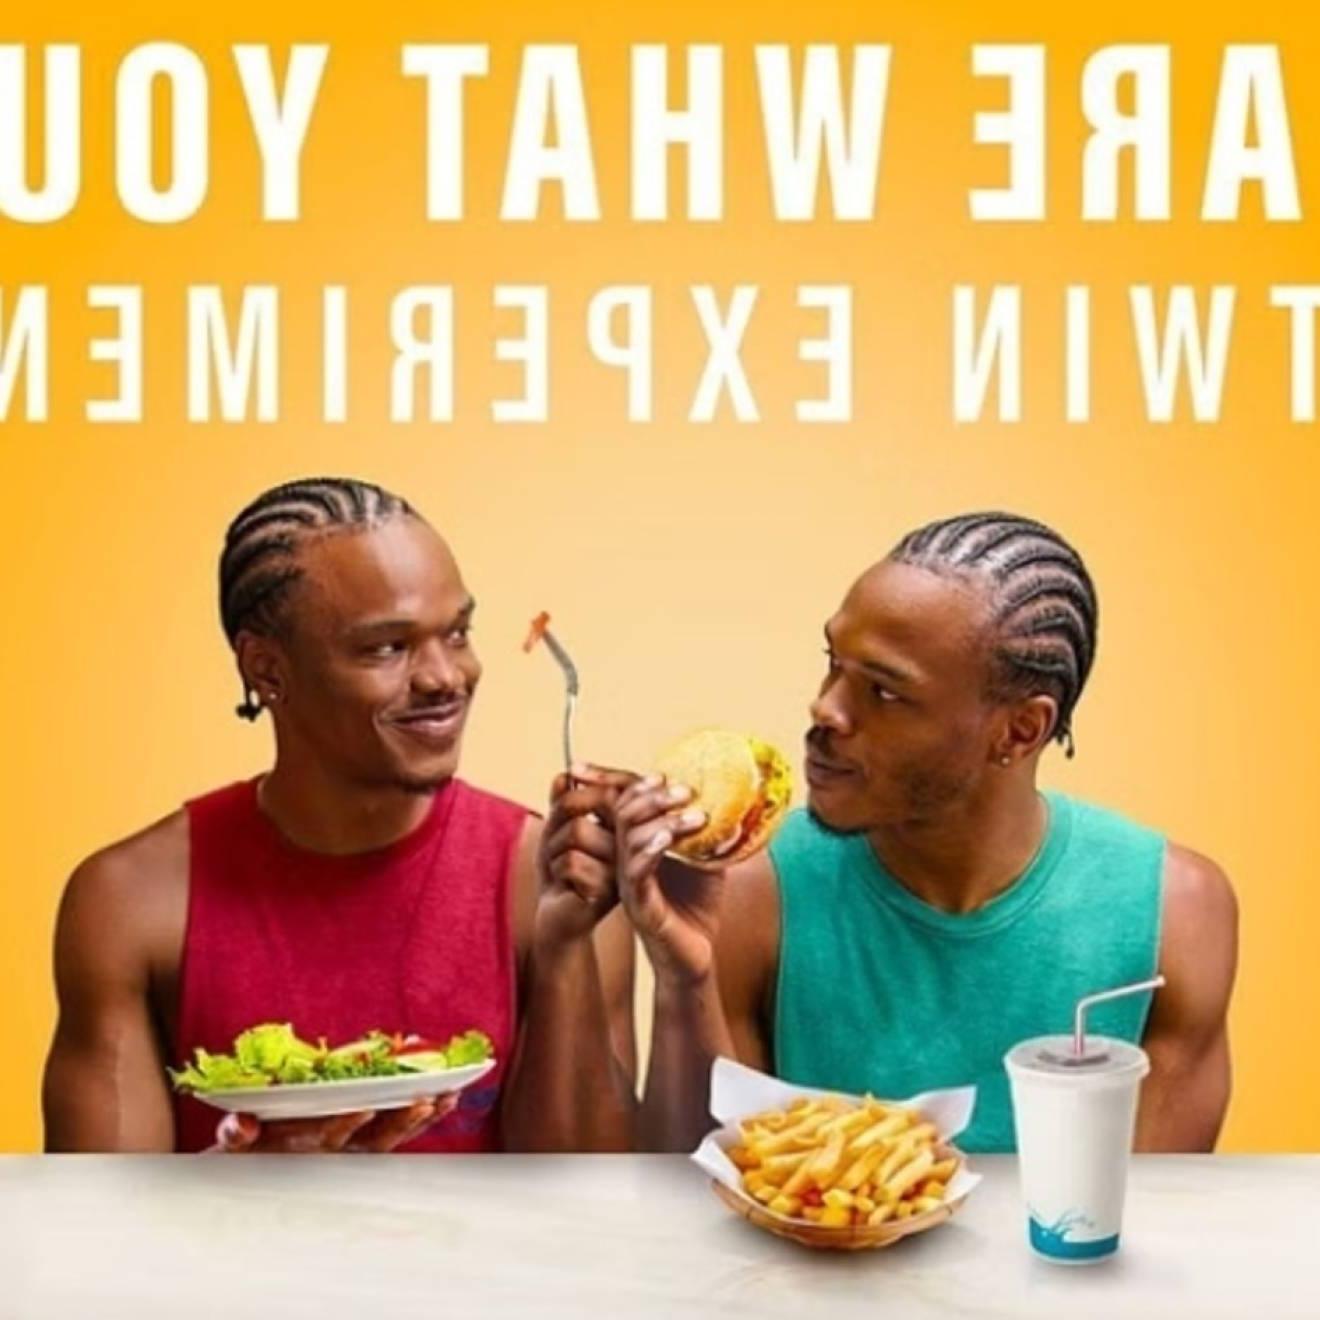 A photo of two young African American men, twins, one eating fast food and the other eating a salad